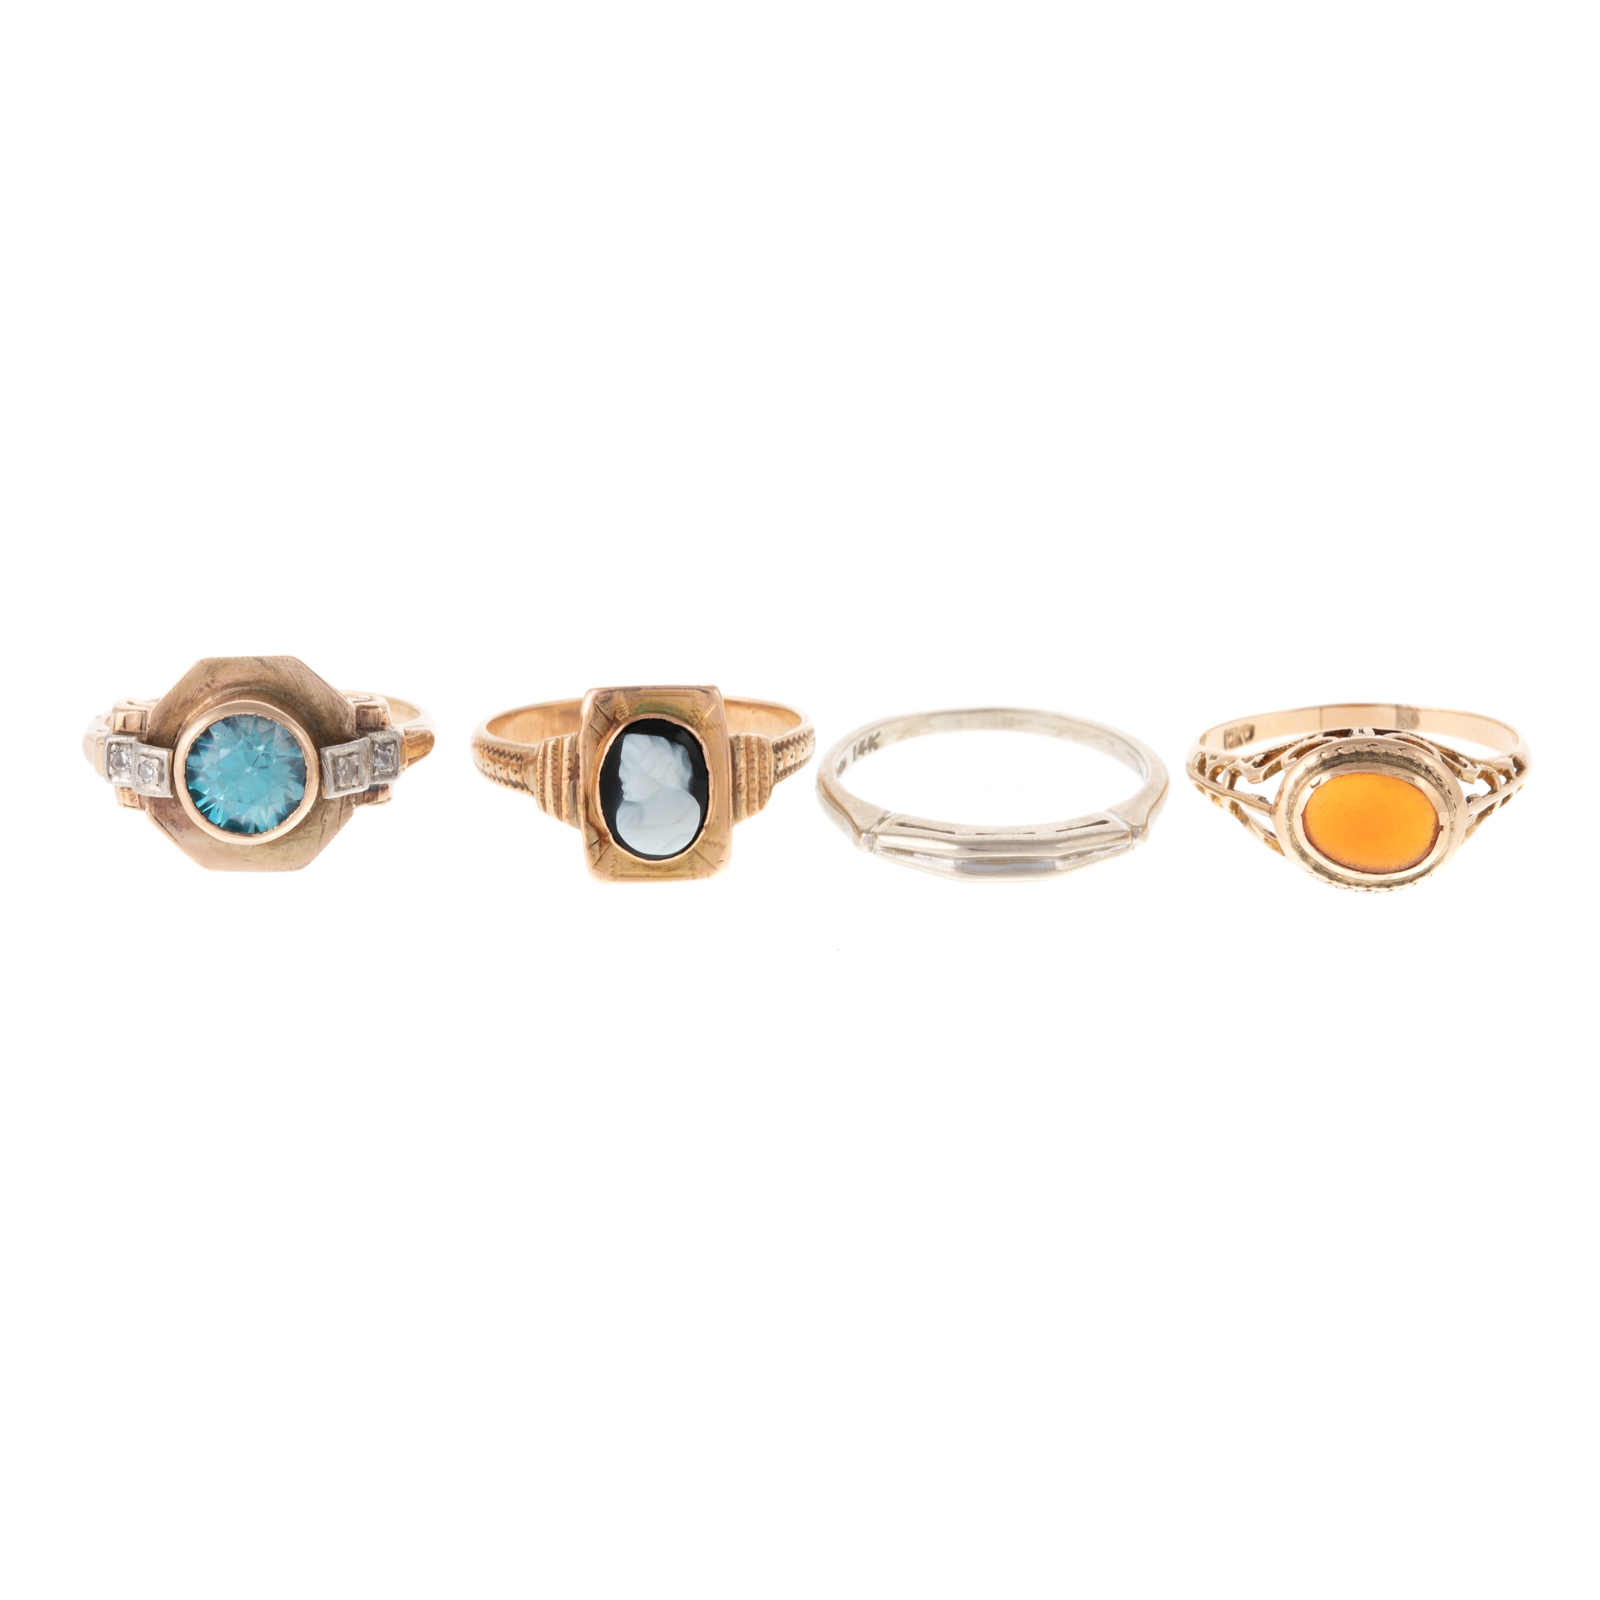 A COLLECTION OF GEMSTONE RINGS